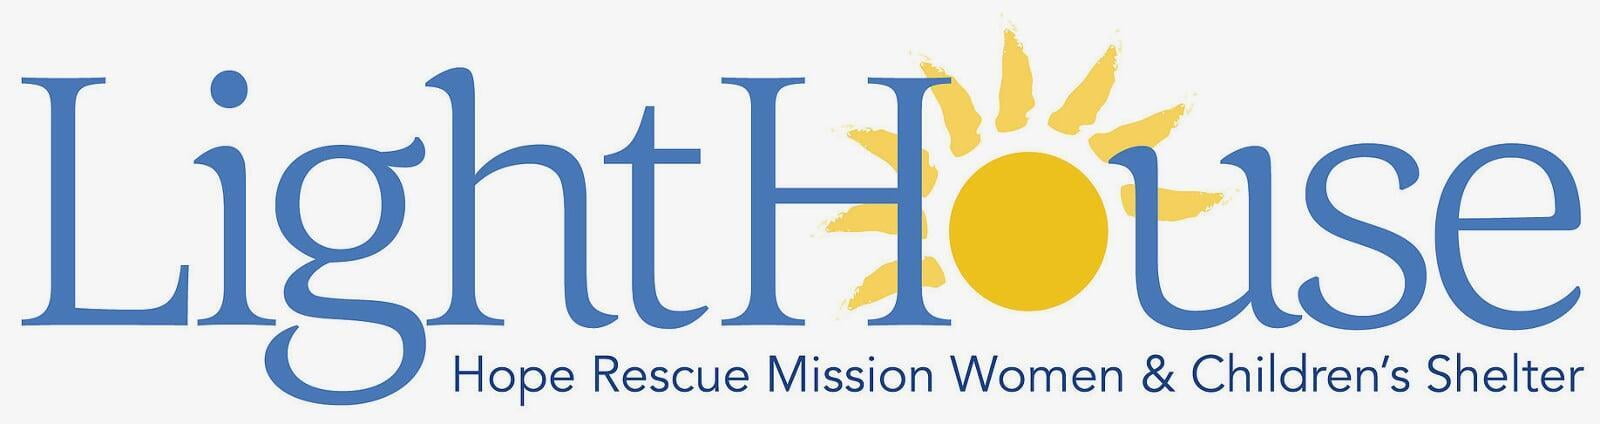 Logo for Hope Rescue Mission's Women and Children's Shelter, Lighthouse.